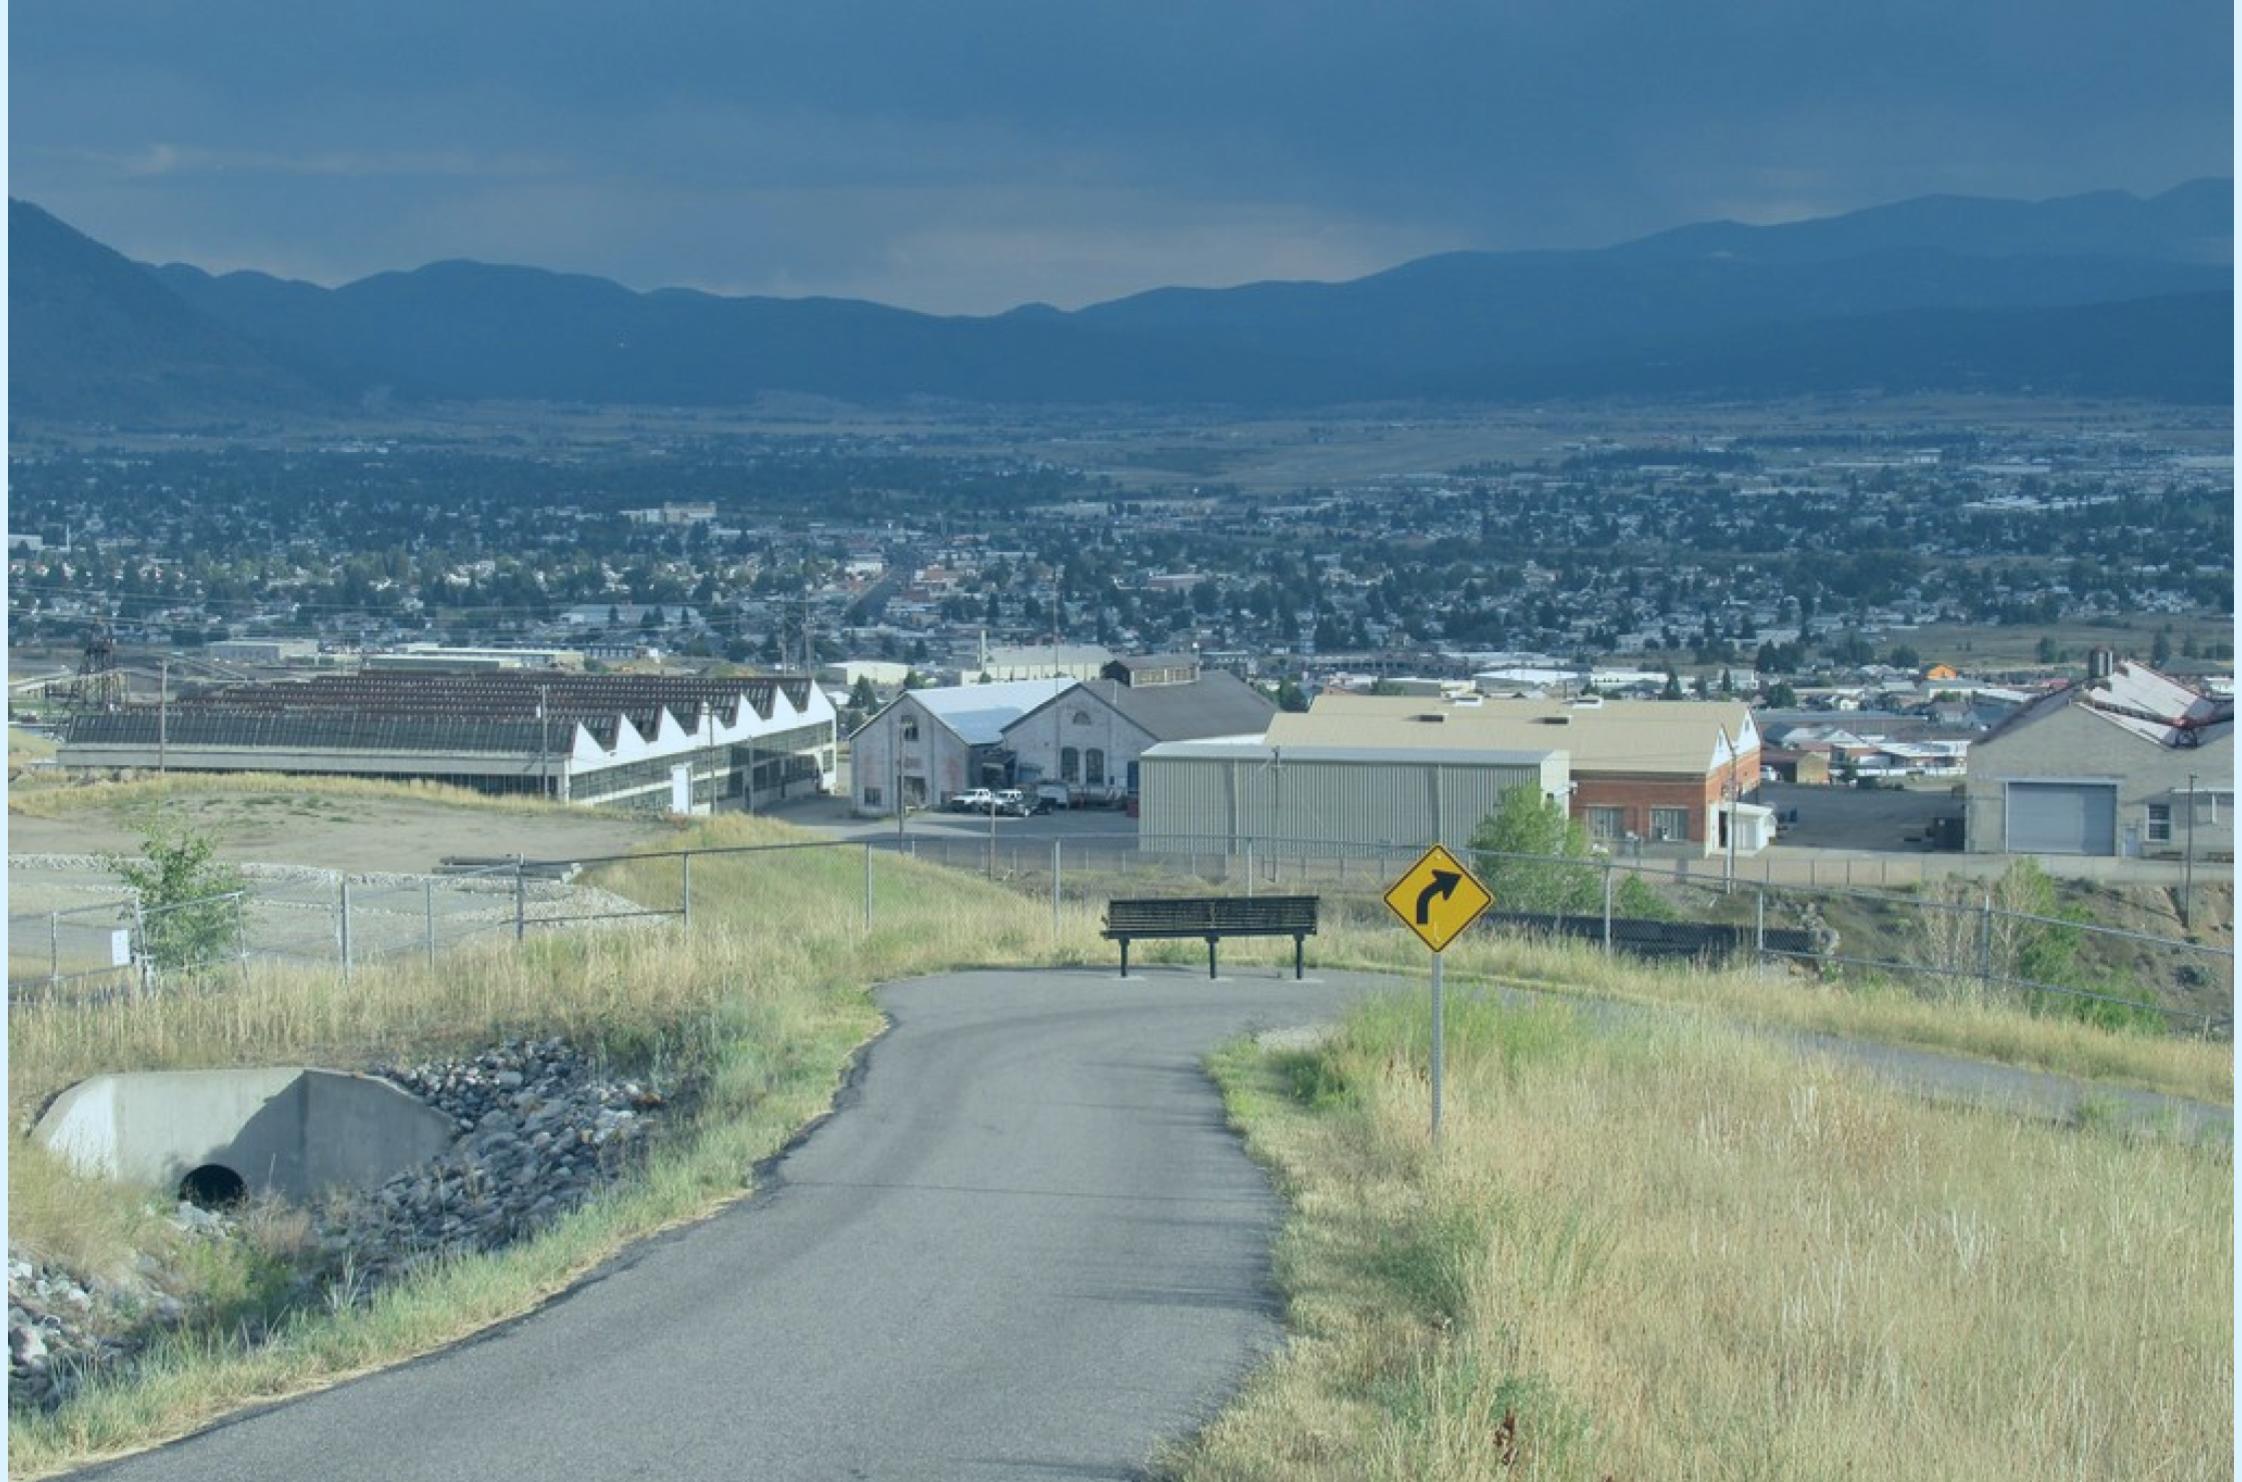 View approaching Butte, Montana with blue montains on the horizon